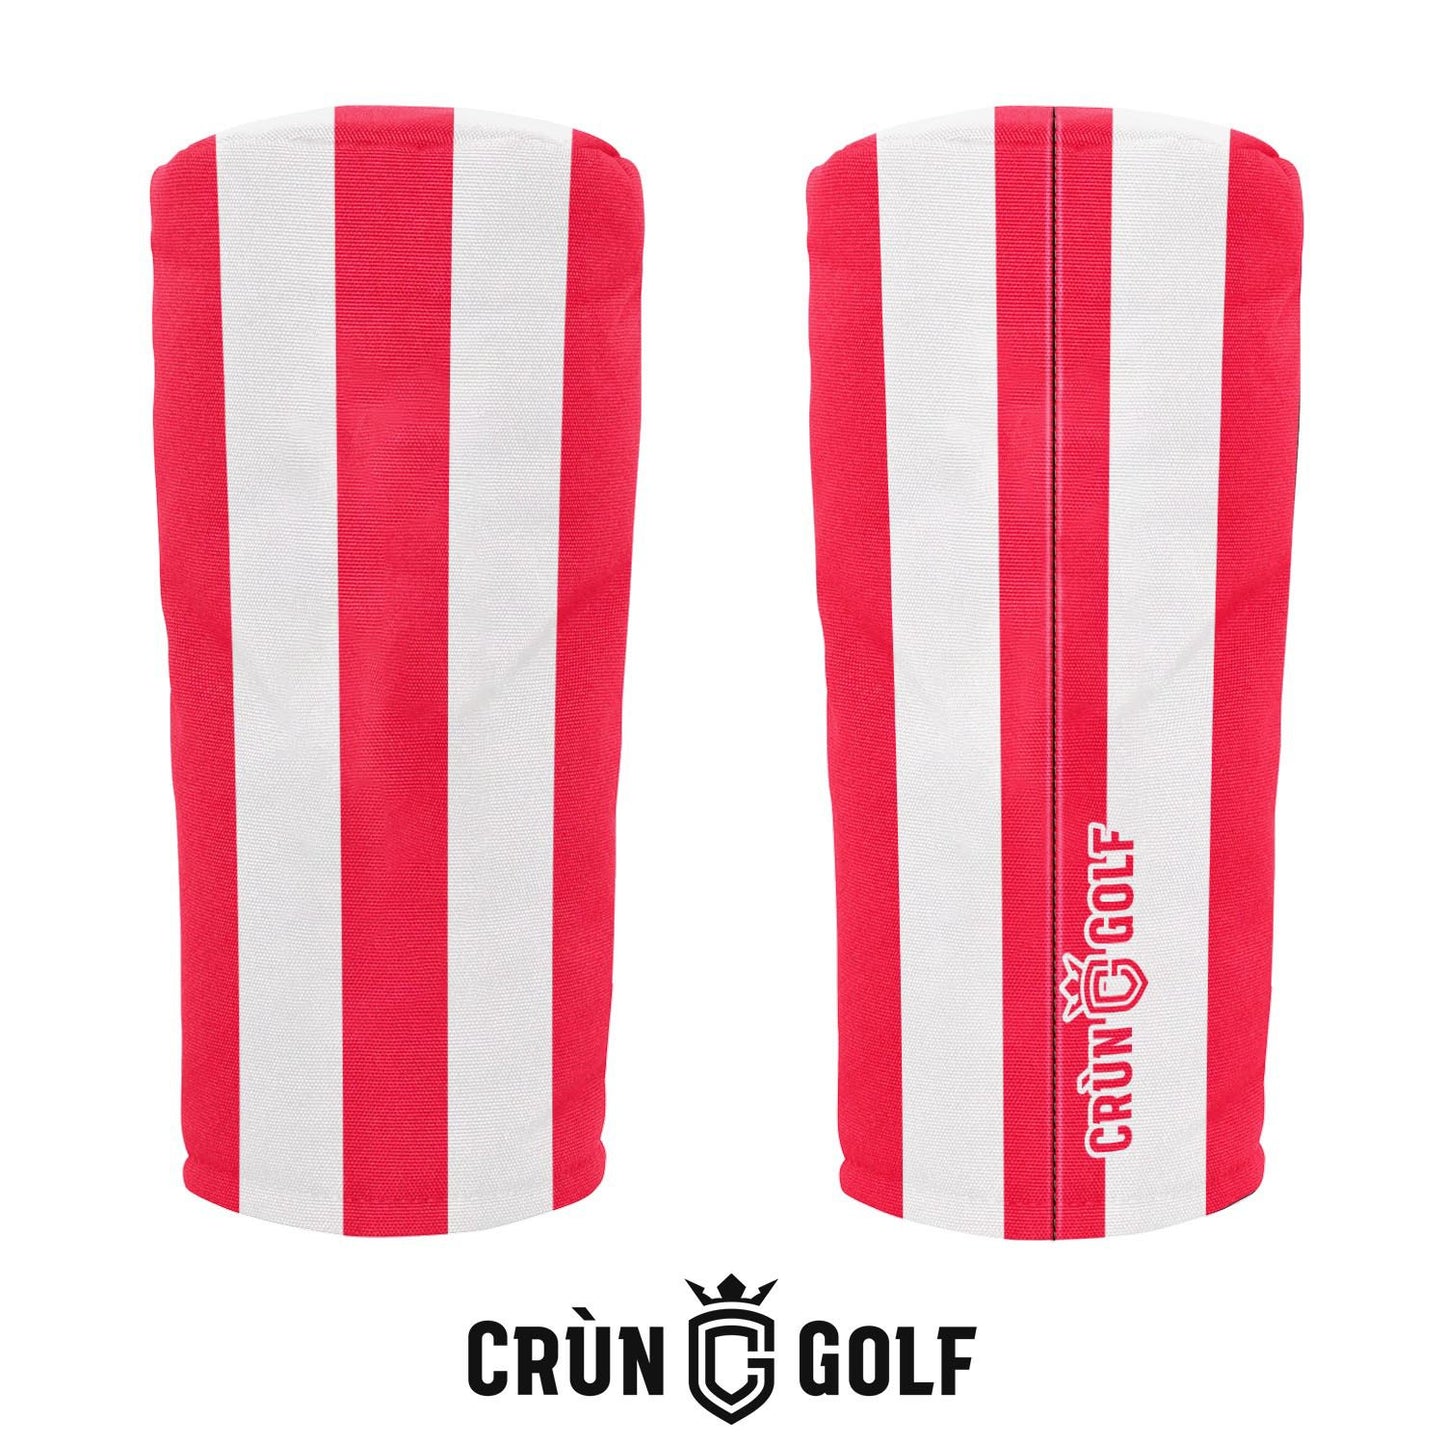 Imps Headcover - 2021 Home